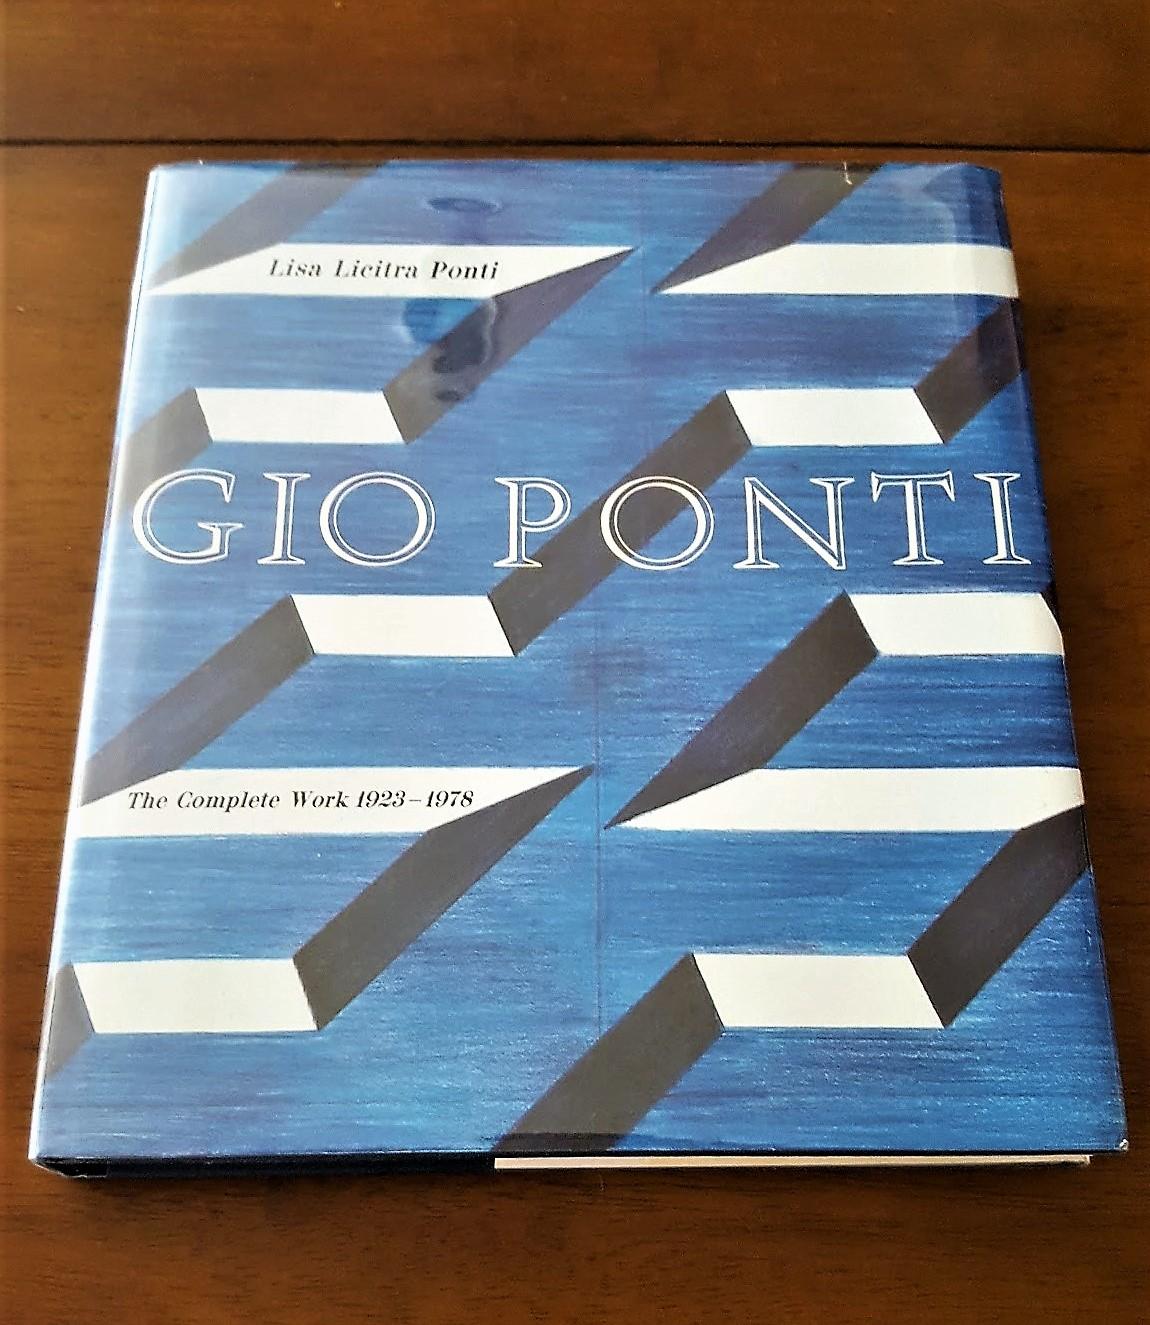 Gio Ponti: the Complete Work